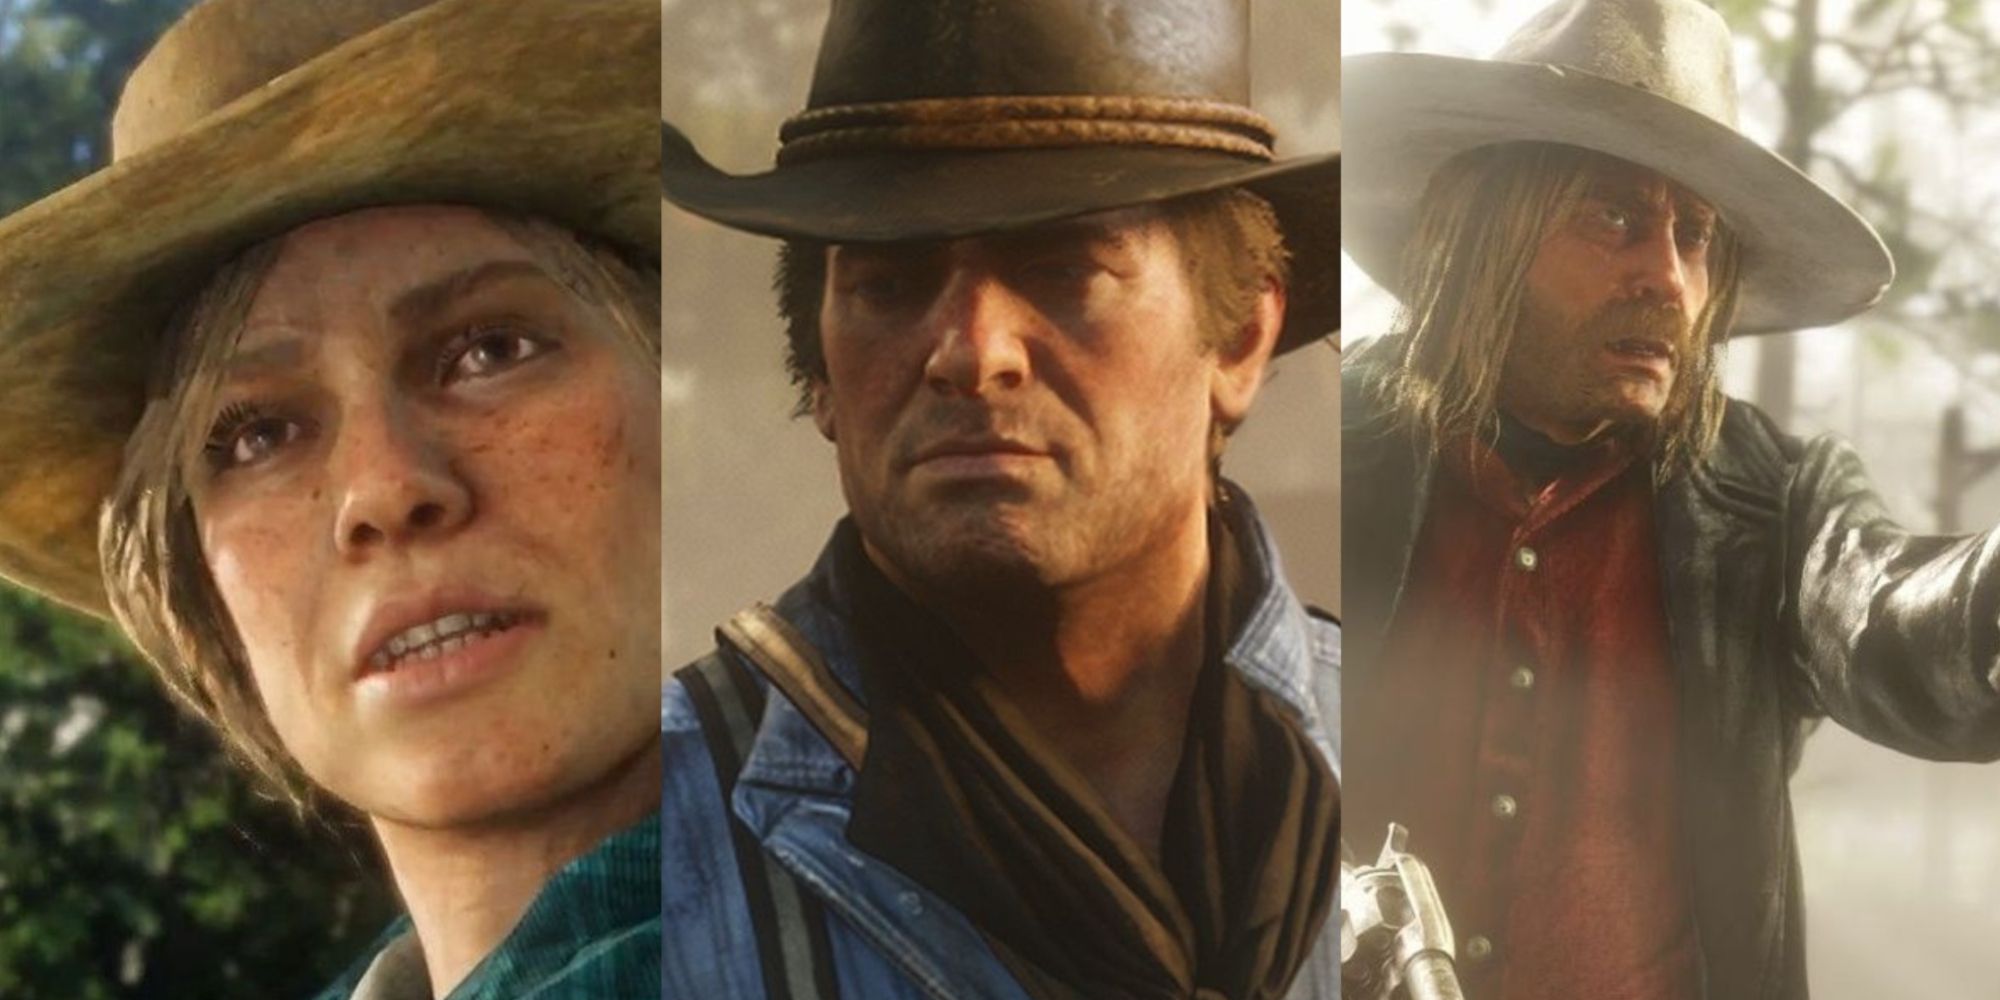 Red Dead Redemption 2 Gang Members Attributes Featured Split Image Sadie, Arthur, And Micah